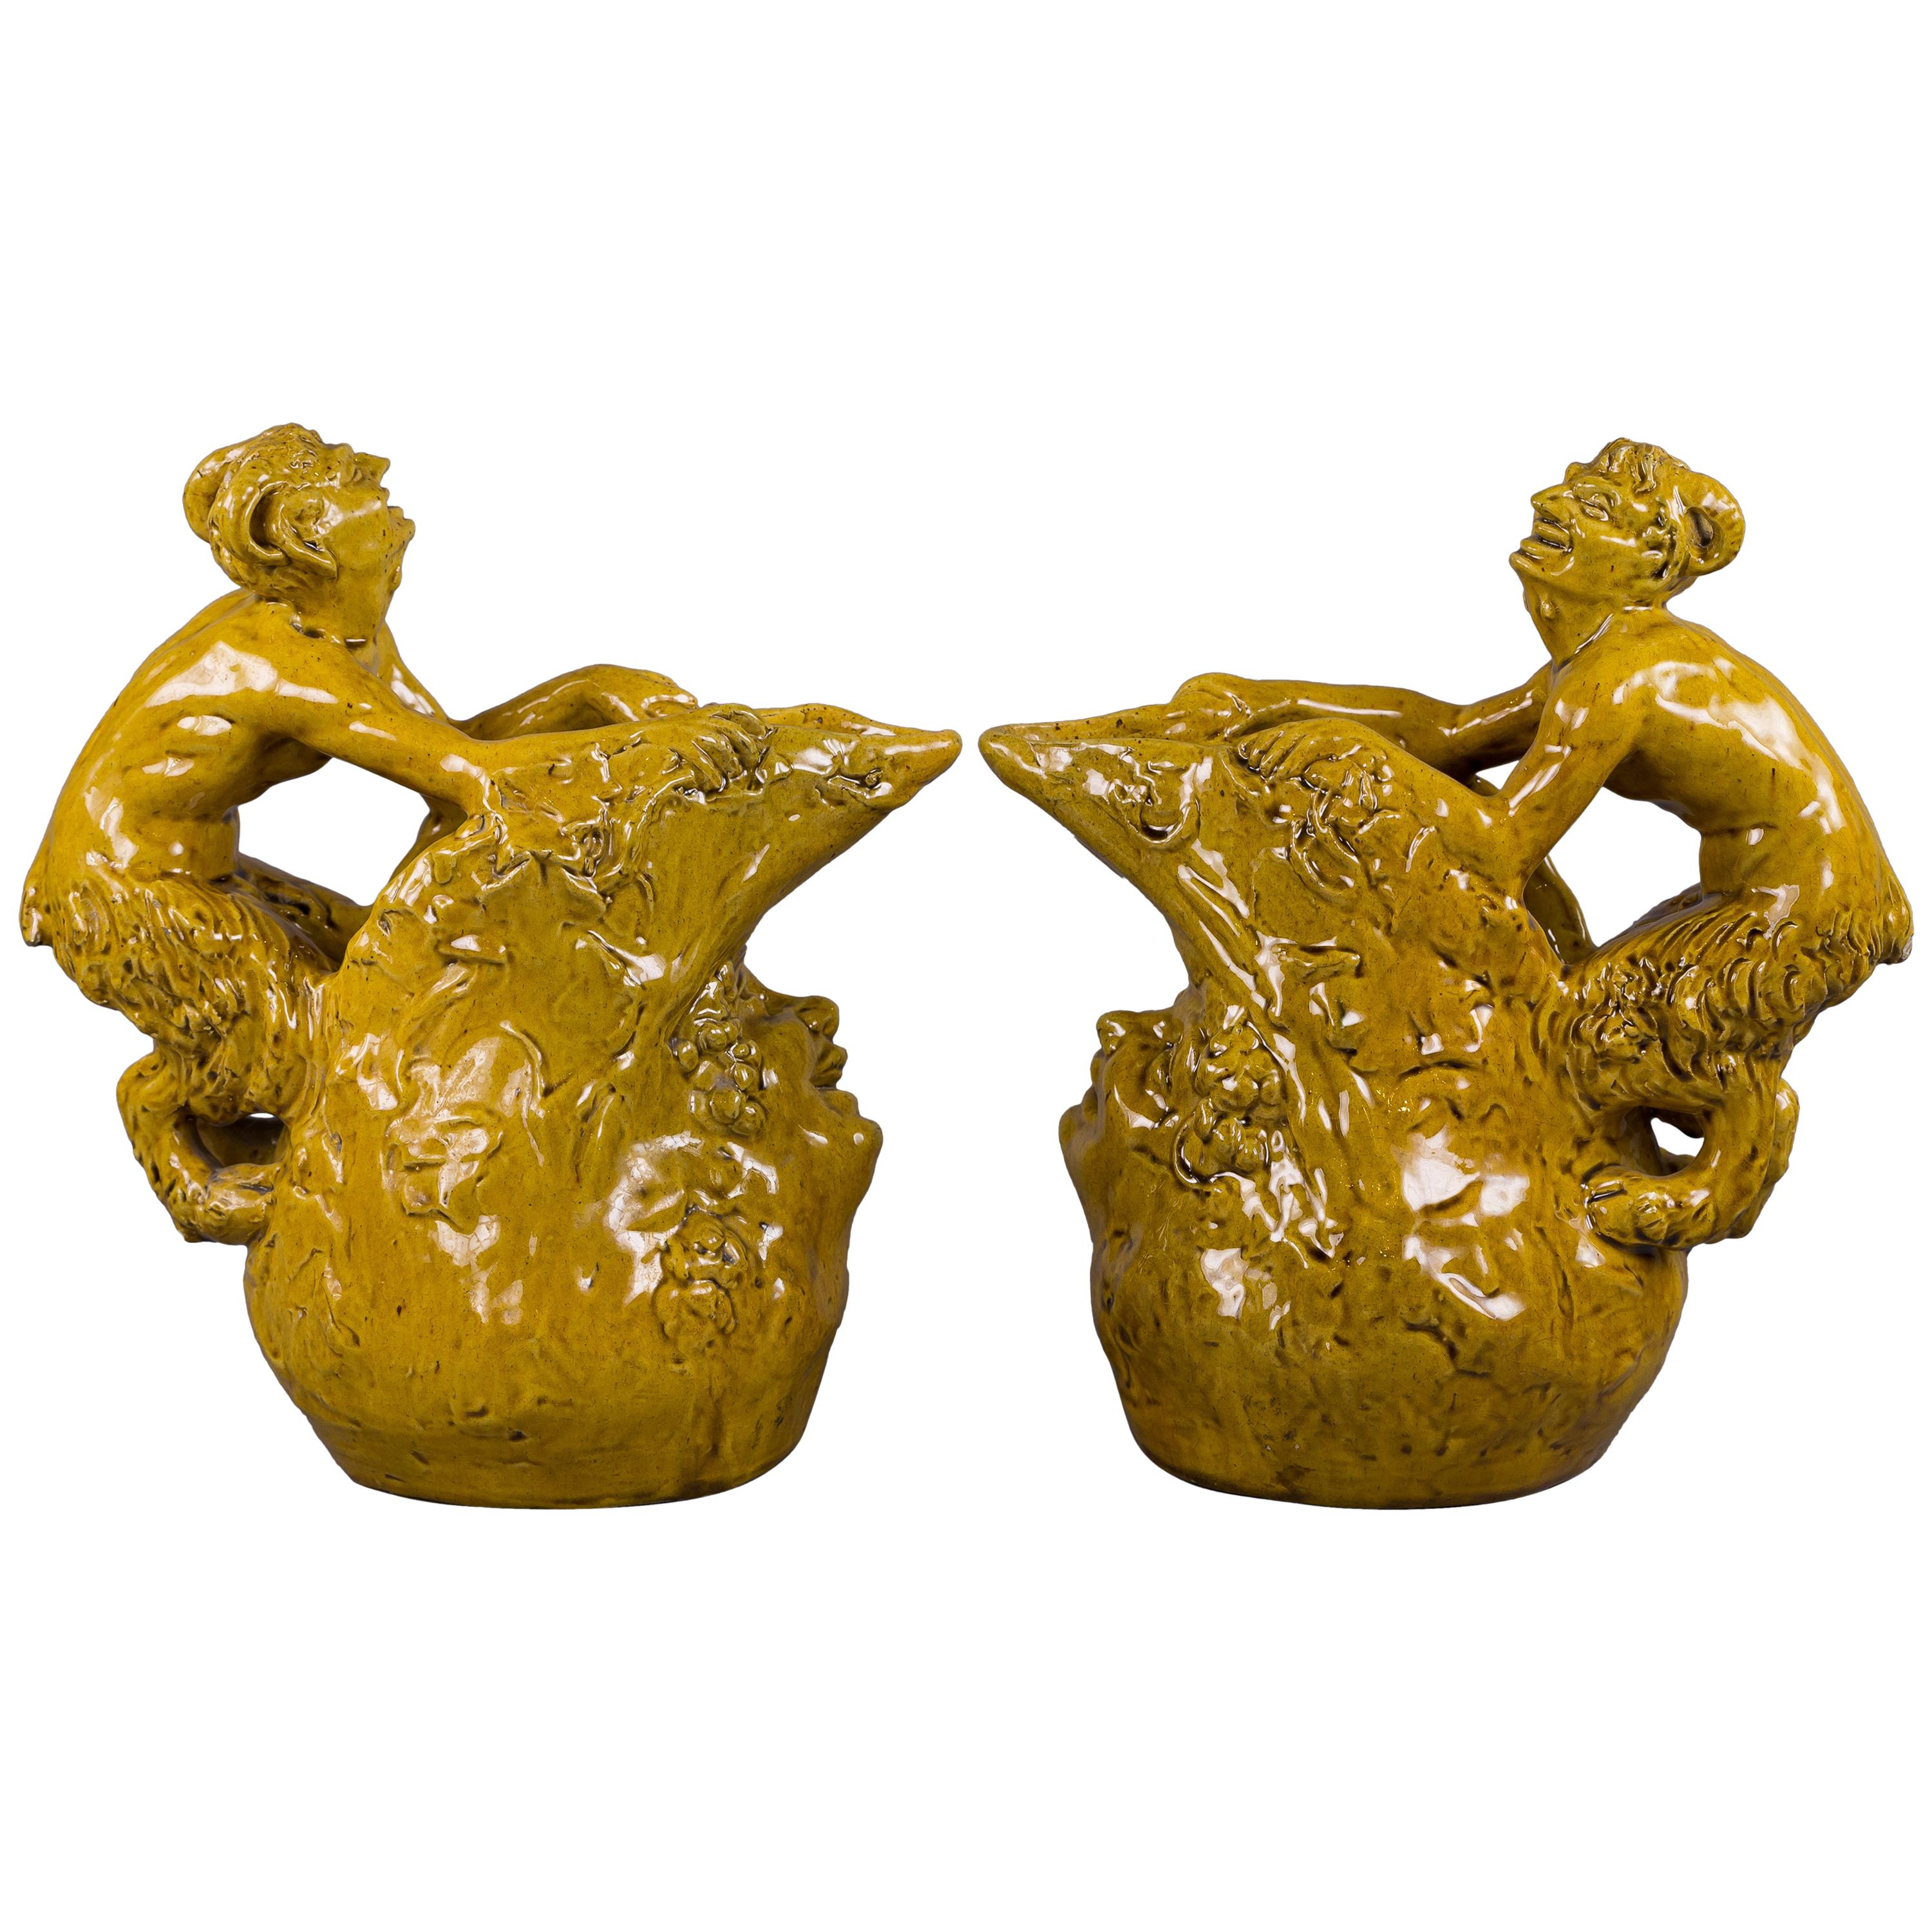 Pair of Continental Yellow Glazed Figural Jugs, circa 1870